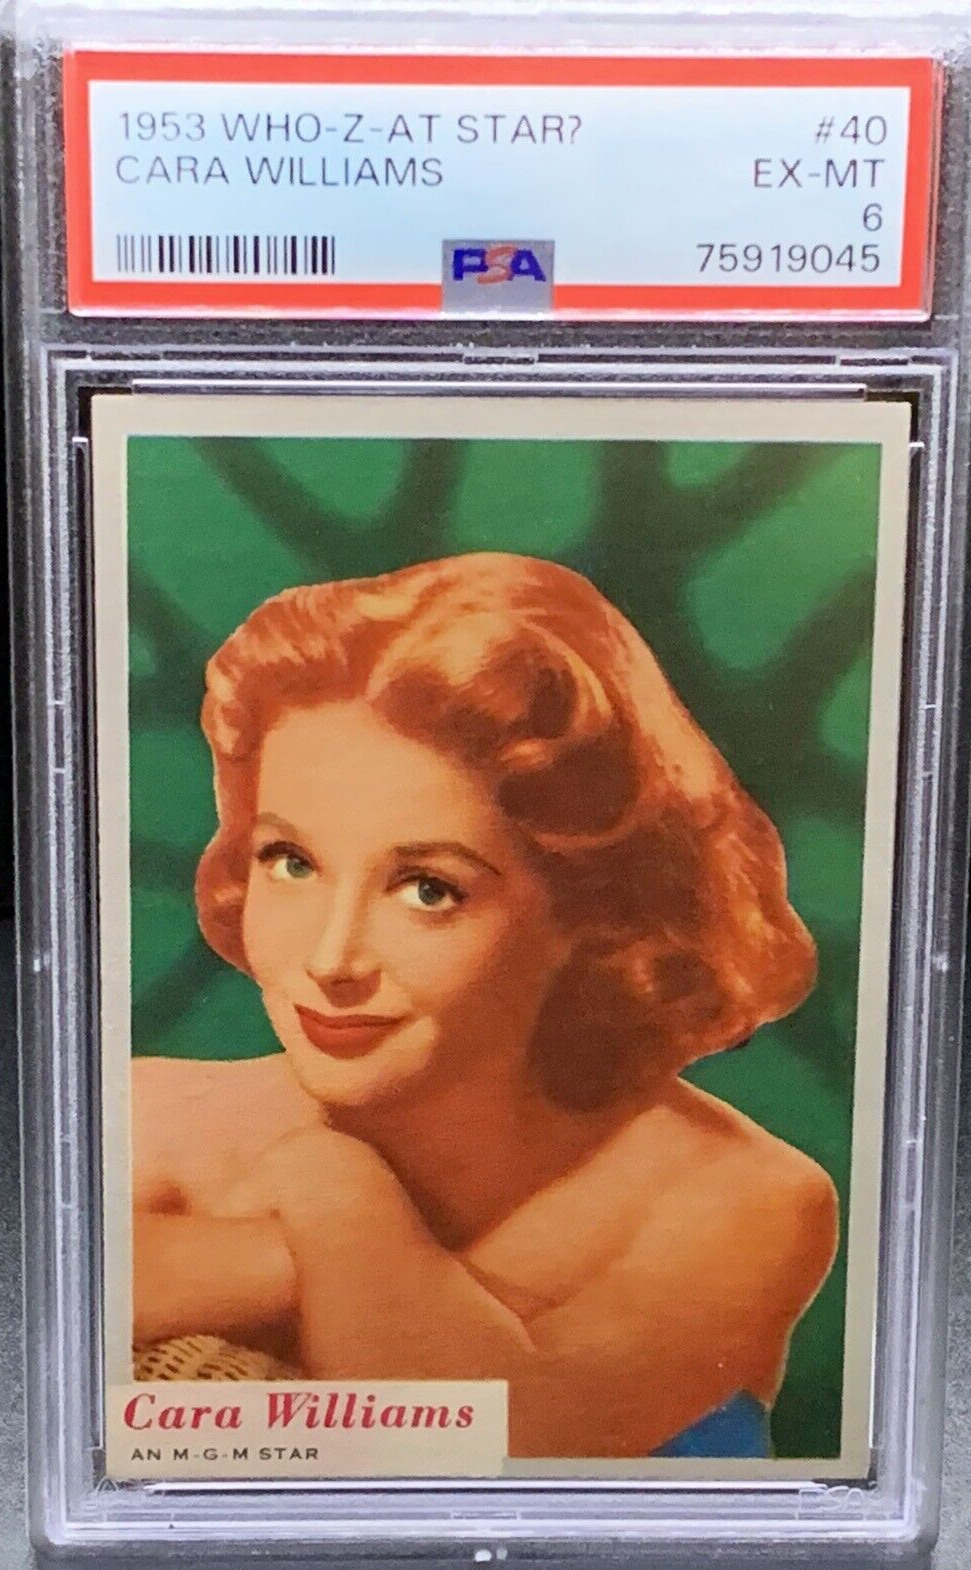 1953 Topps WHO-Z-AT STAR? #40 CARA WILLIAMS PSA 6 VERY LOW POP Original Owner